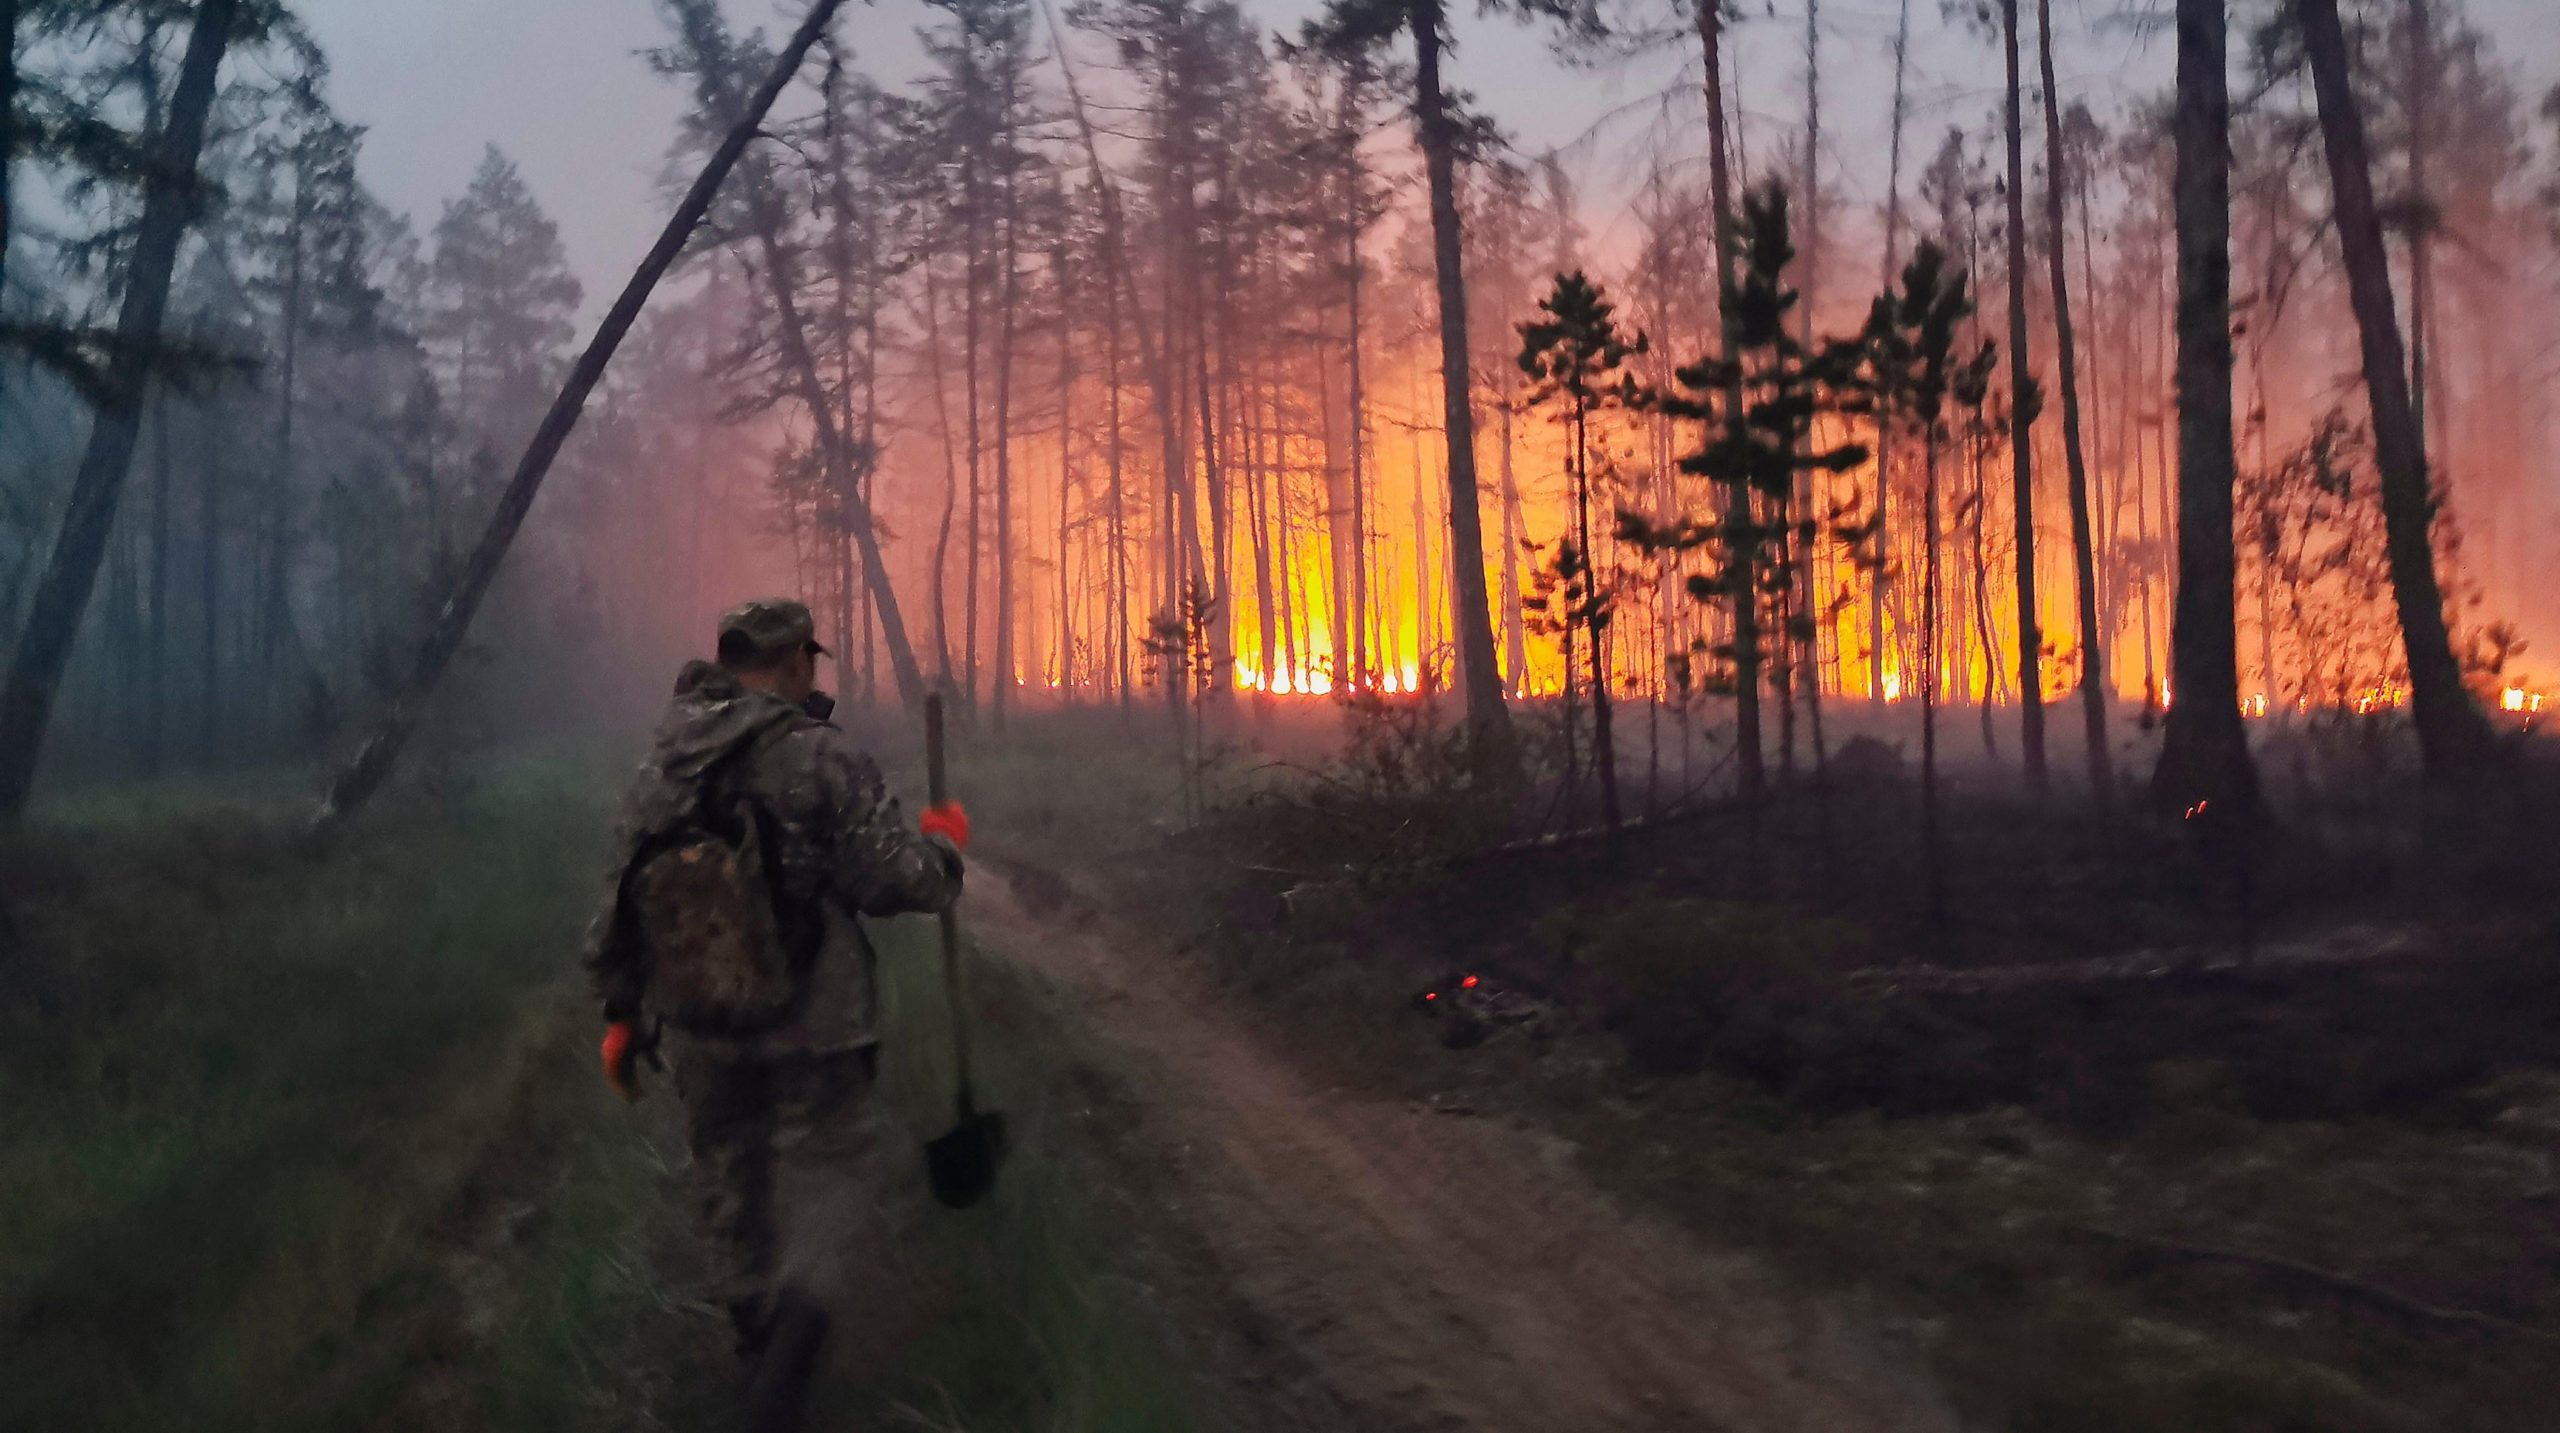 A volunteer heads to douse a forest fire in the republic of Sakha. (Photo: Ivan Nikiforov, AP)